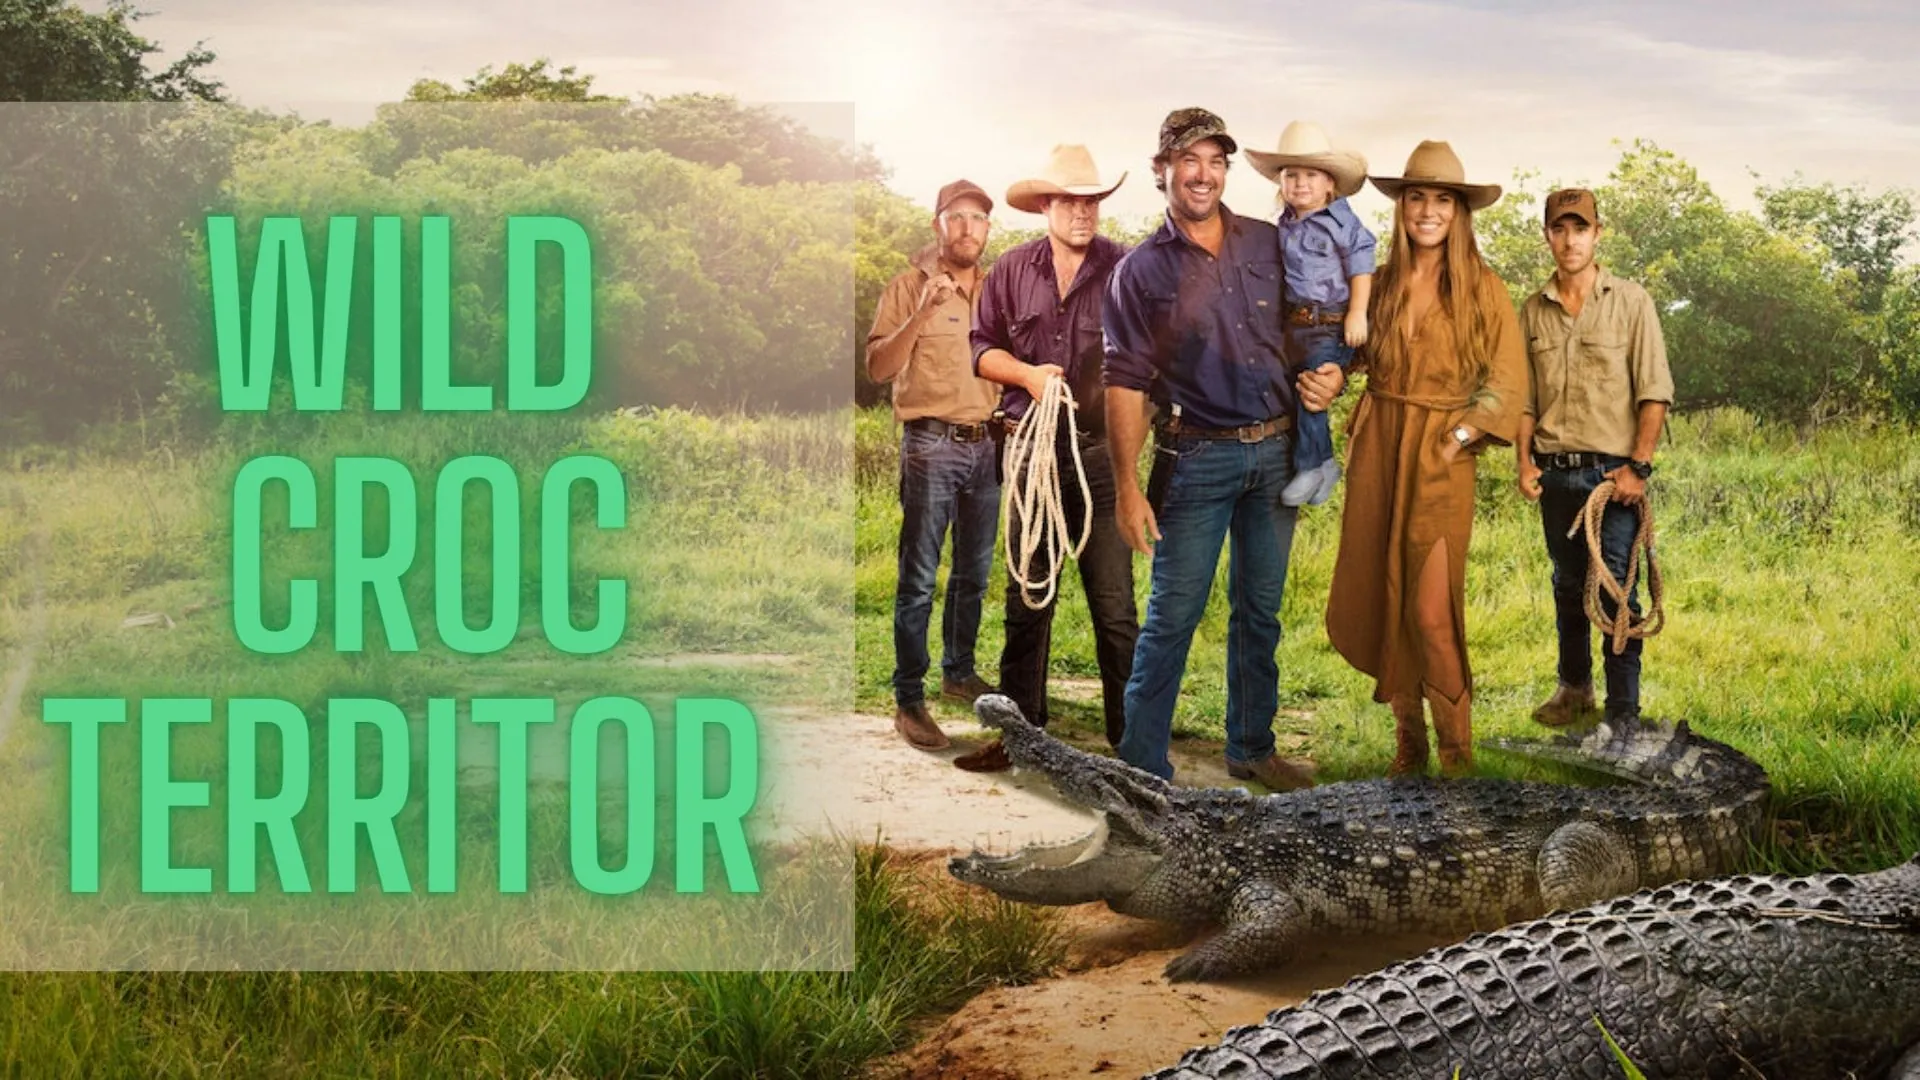 Wild Croc Territory Parents Guide | Age Rating (2022)